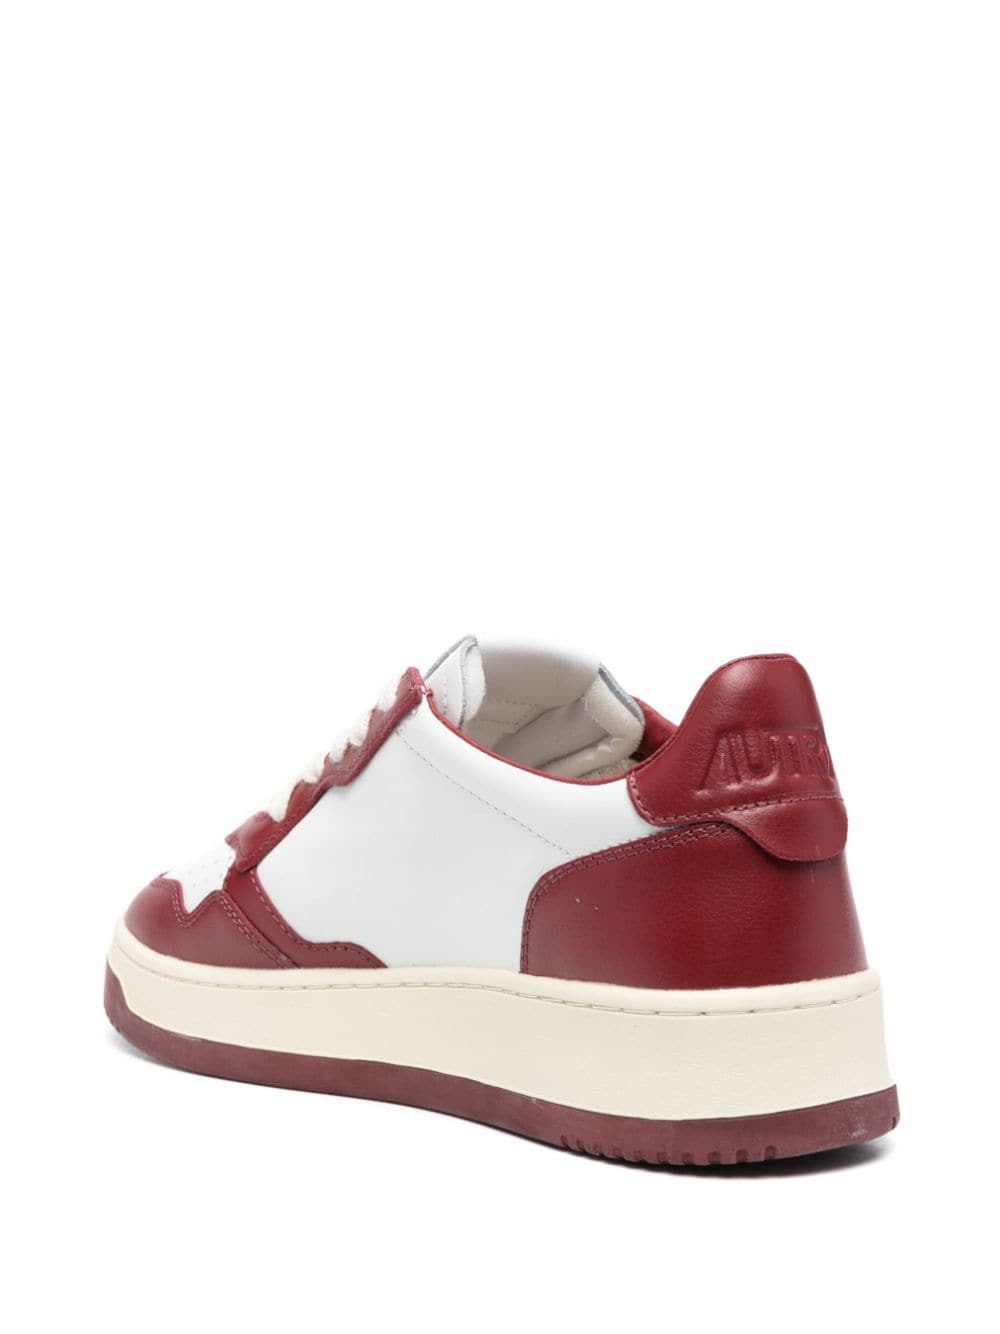 white and burgundy leather sneakers